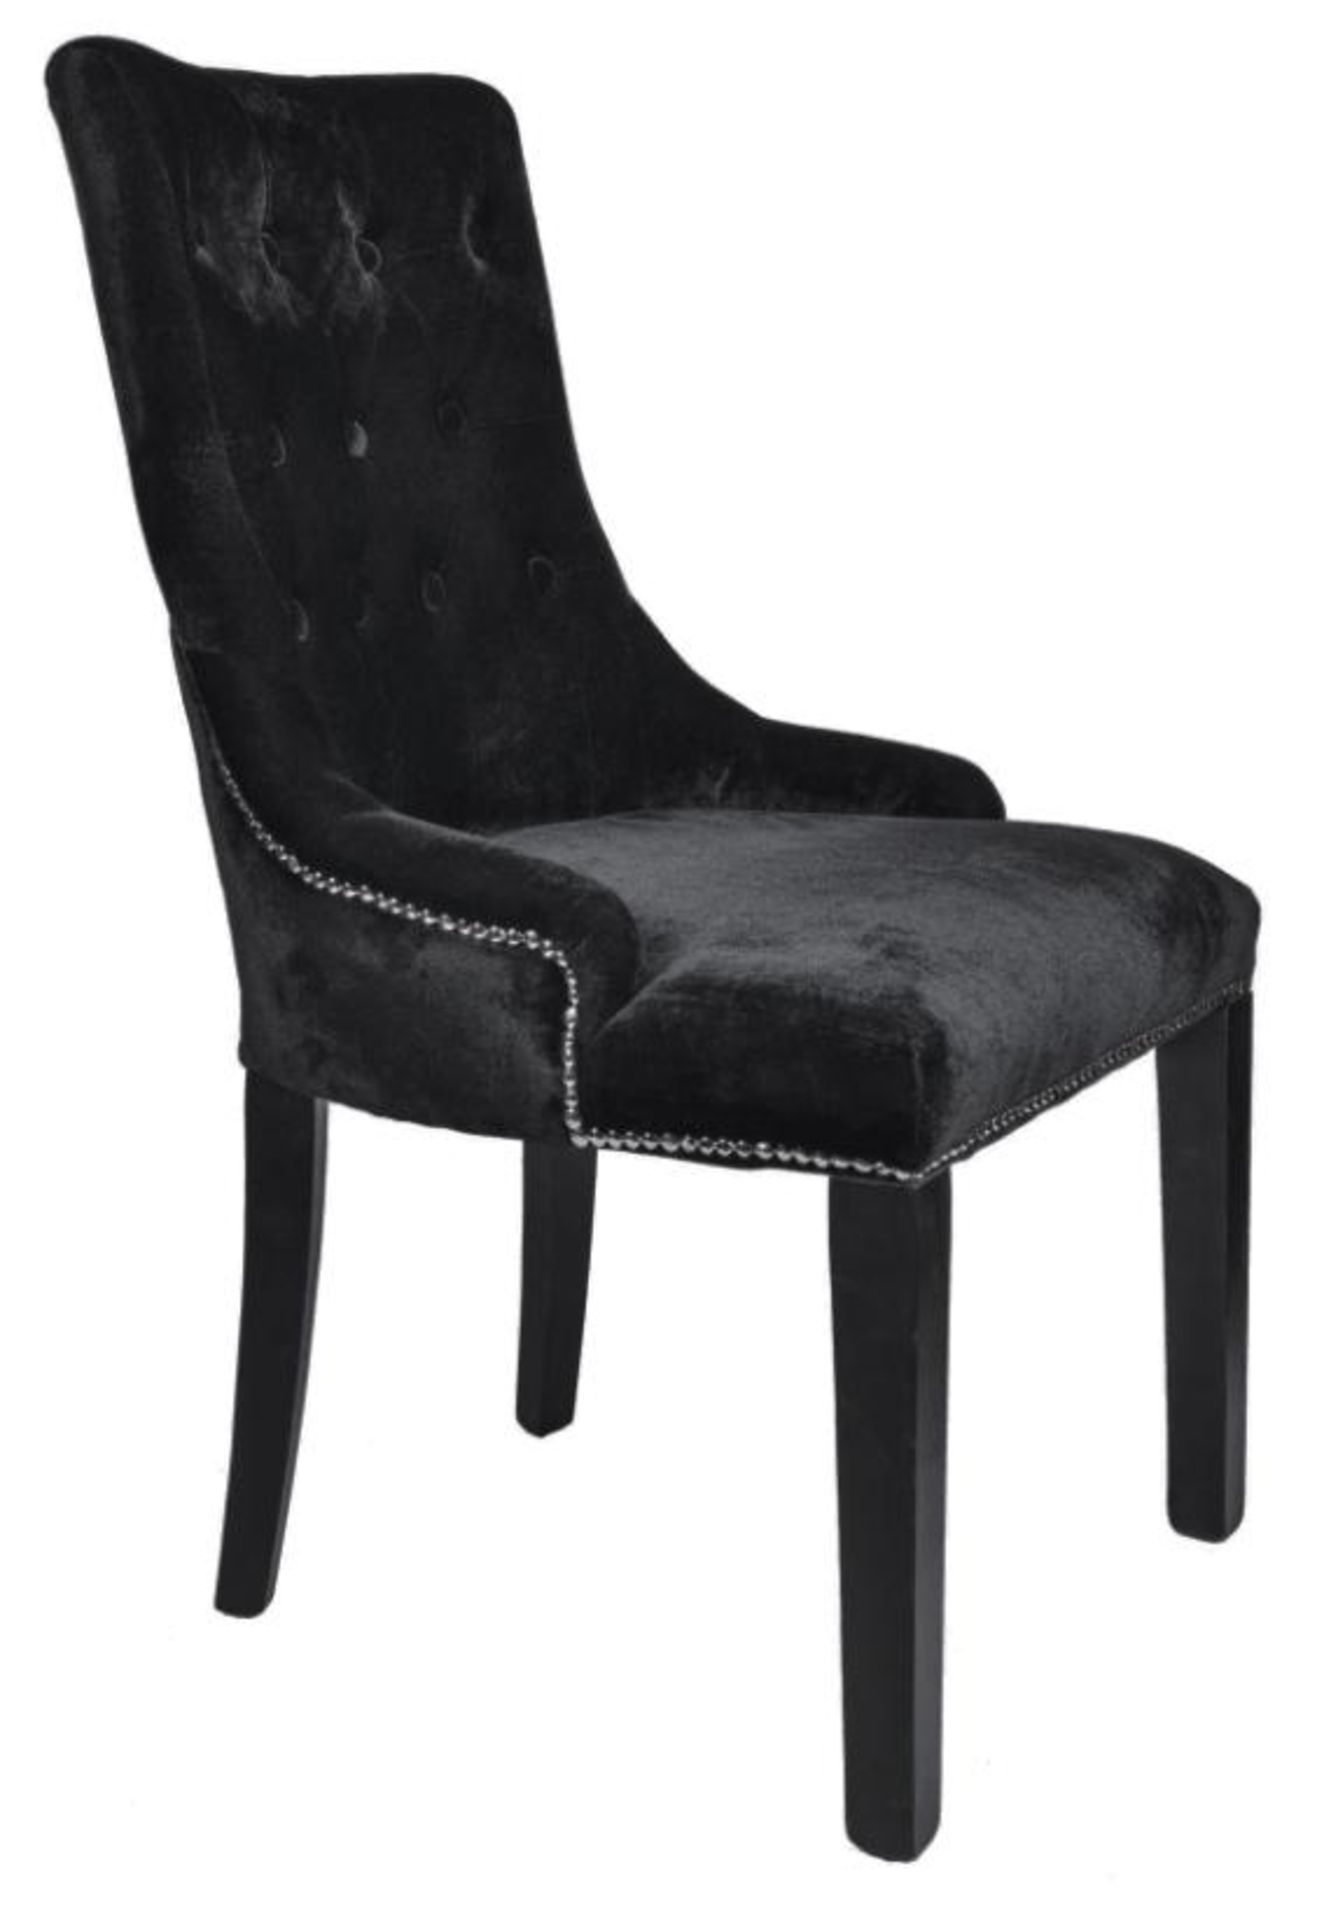 6 x HOUSE OF SPARKLES Luxury Vintage-style 'LION' Button-Back Dining Chairs Richly Upholstered In - Image 4 of 11